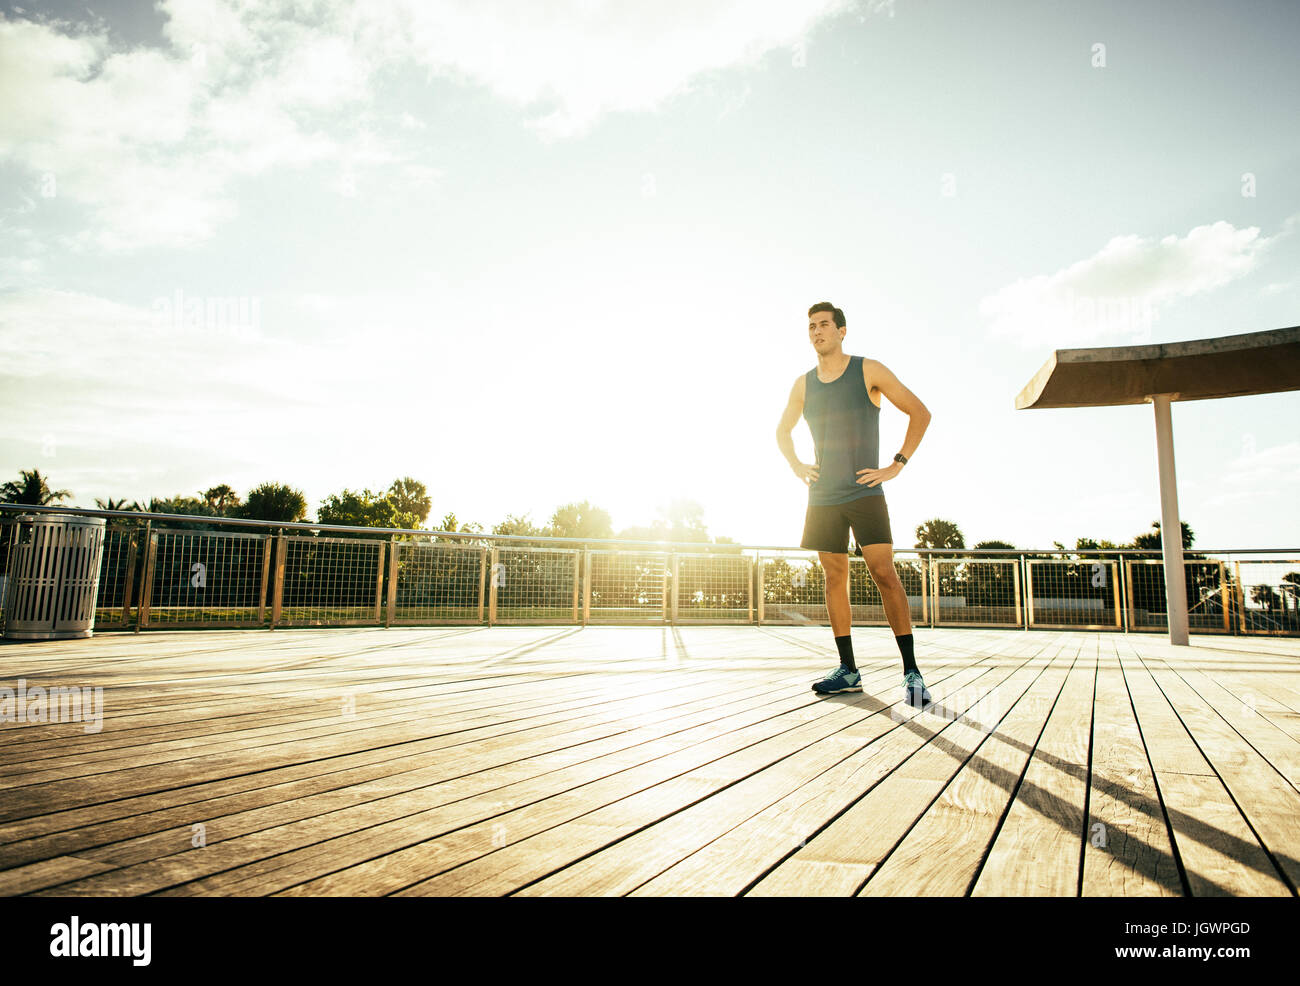 Young man wearing sports clothing, standing outdoors, hands on hips Stock Photo